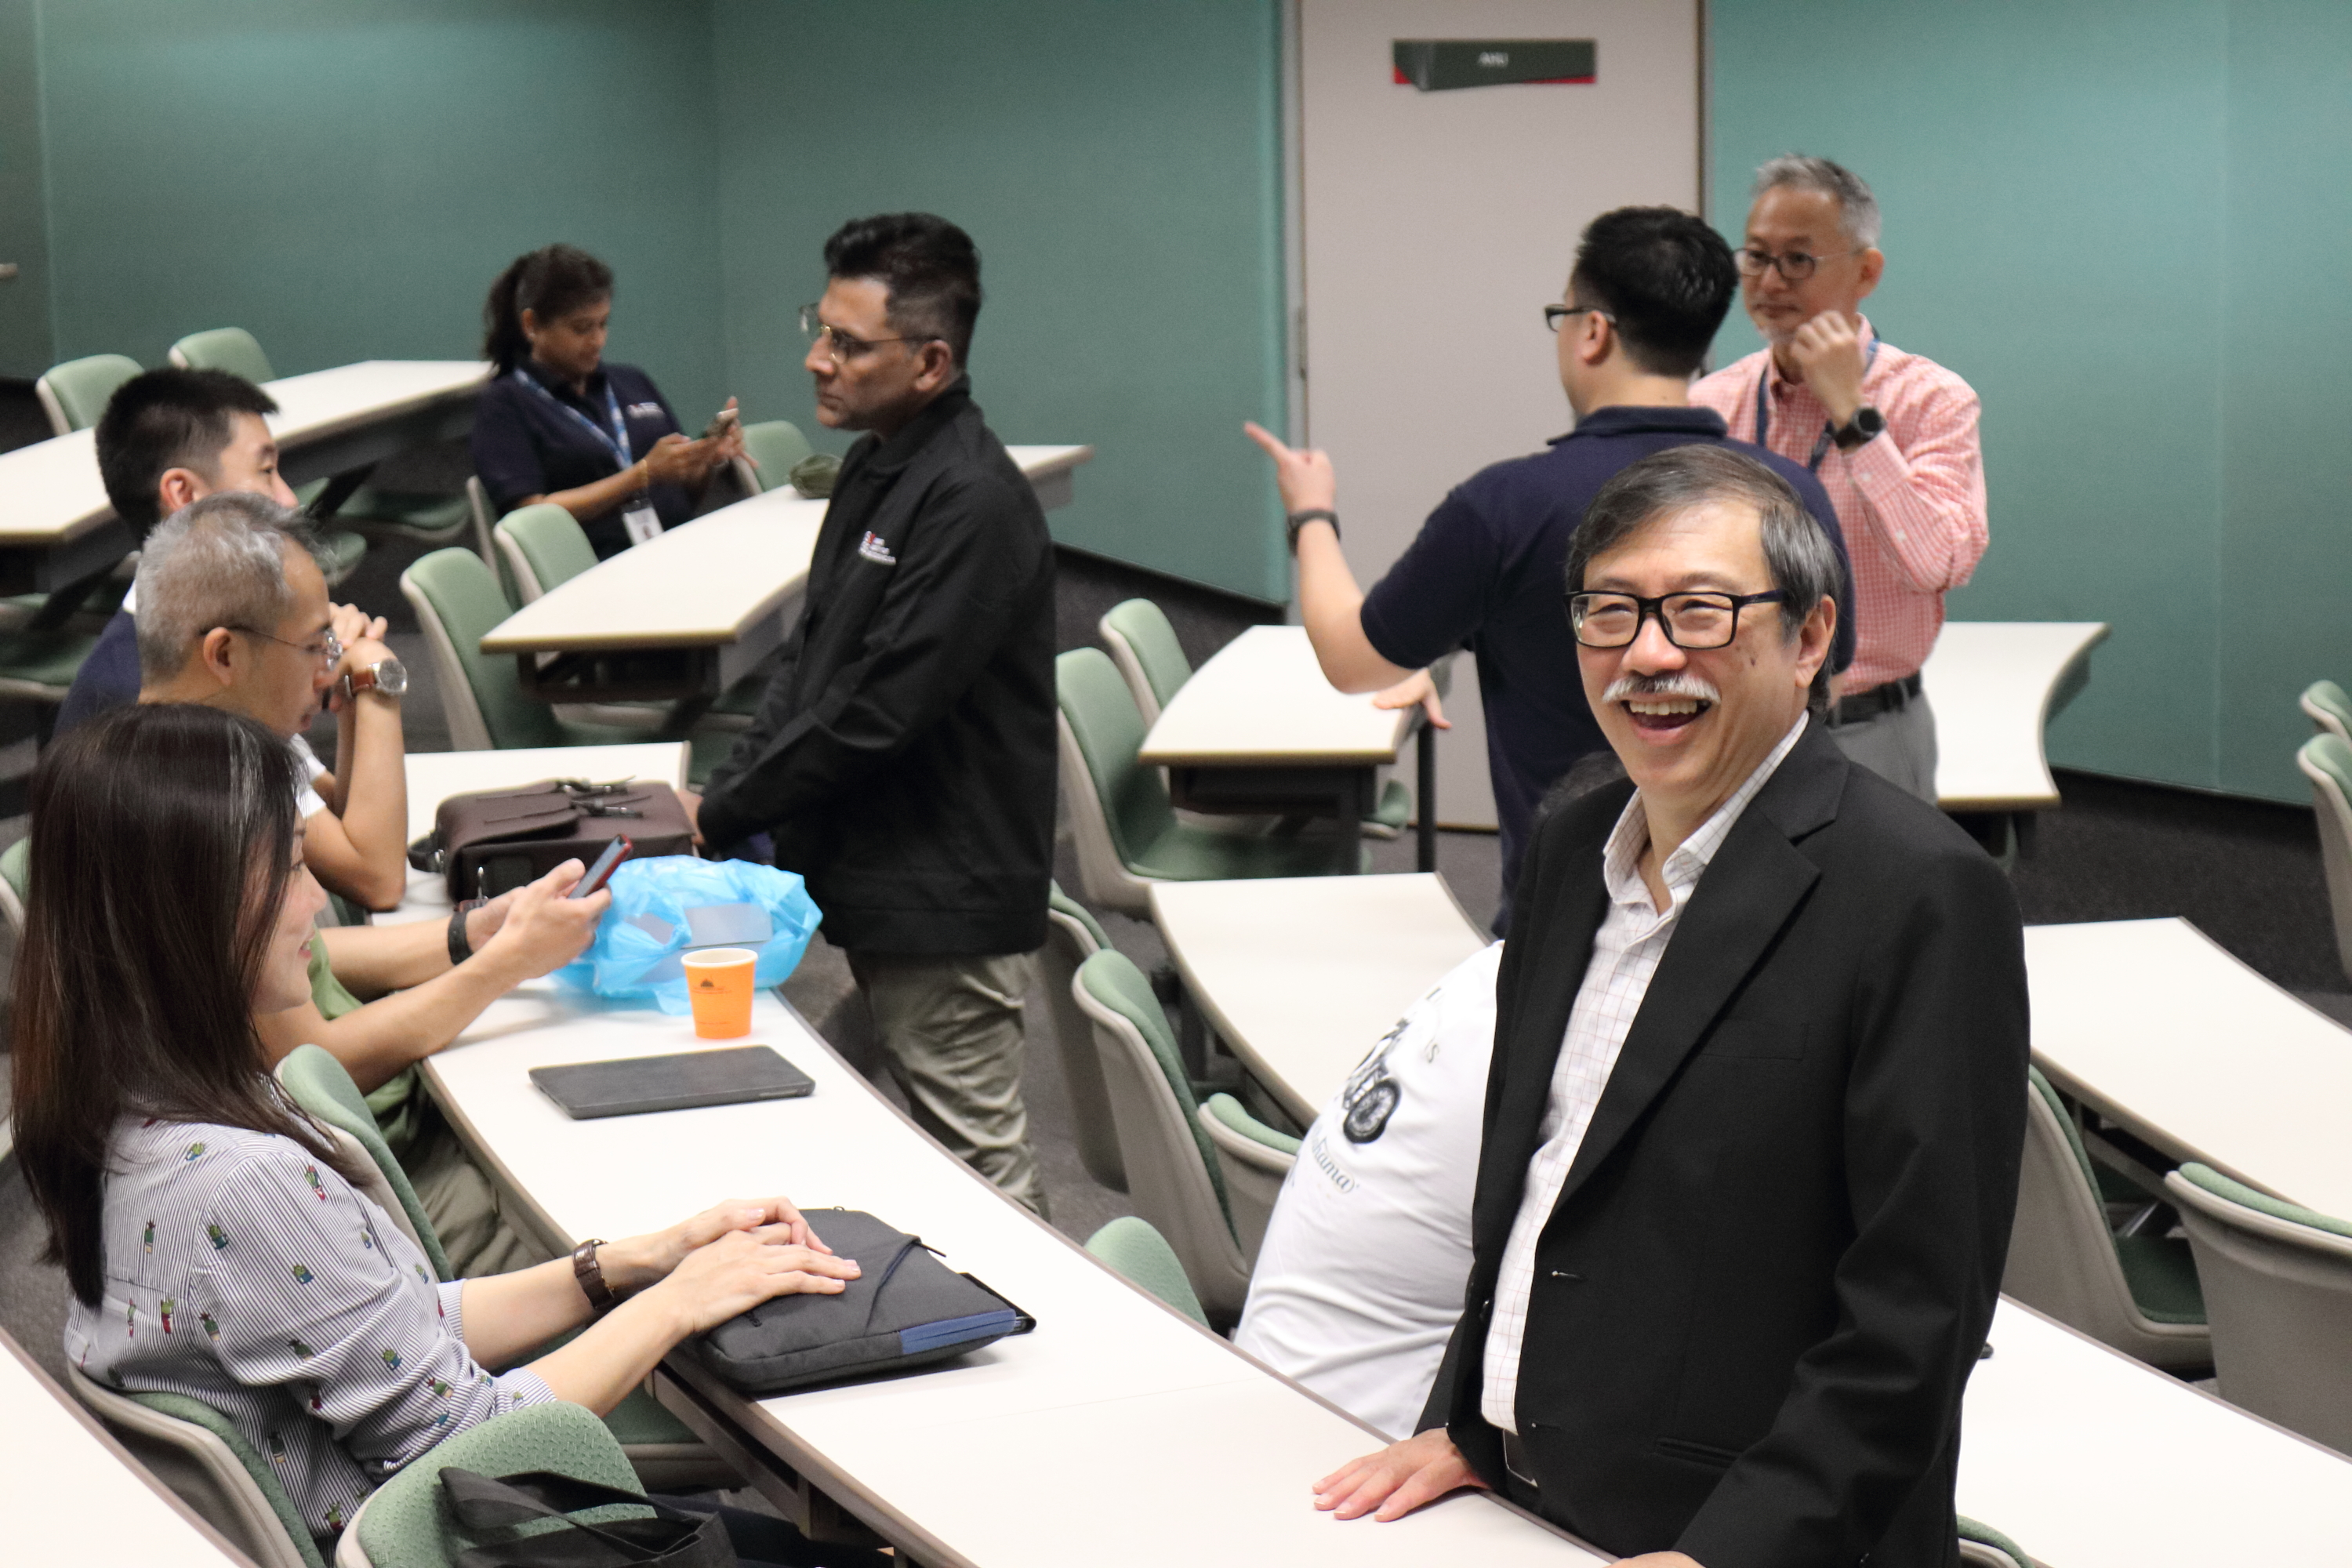 Prof Chew sharing a candid moment with his students at SUSS. (Credit: Prof Leslie Chew)